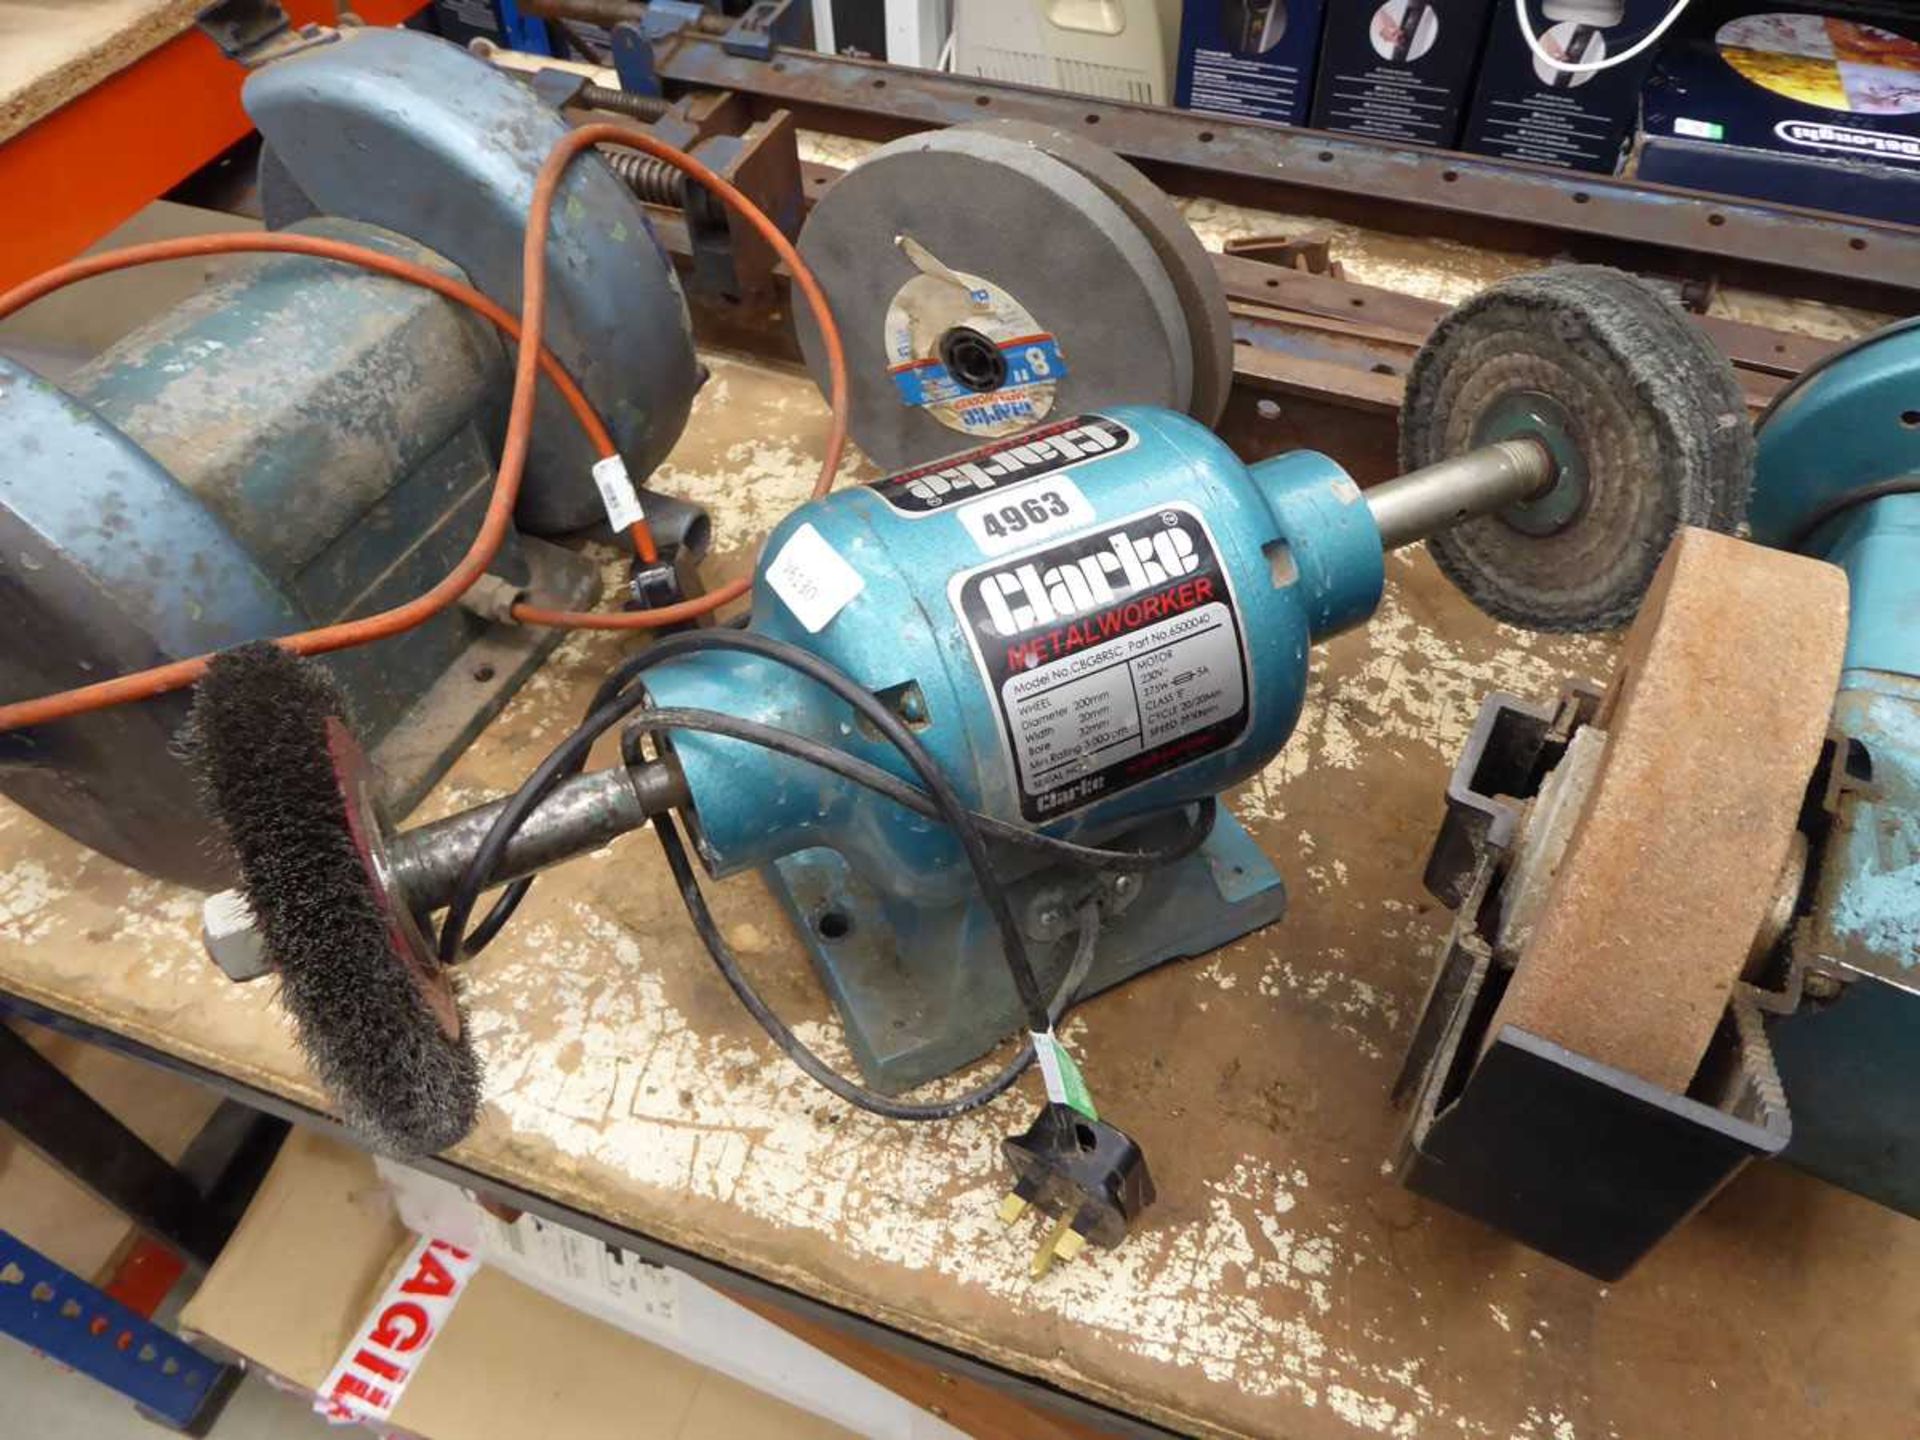 Clarke 18" bench grinder with polishing head and wire brush